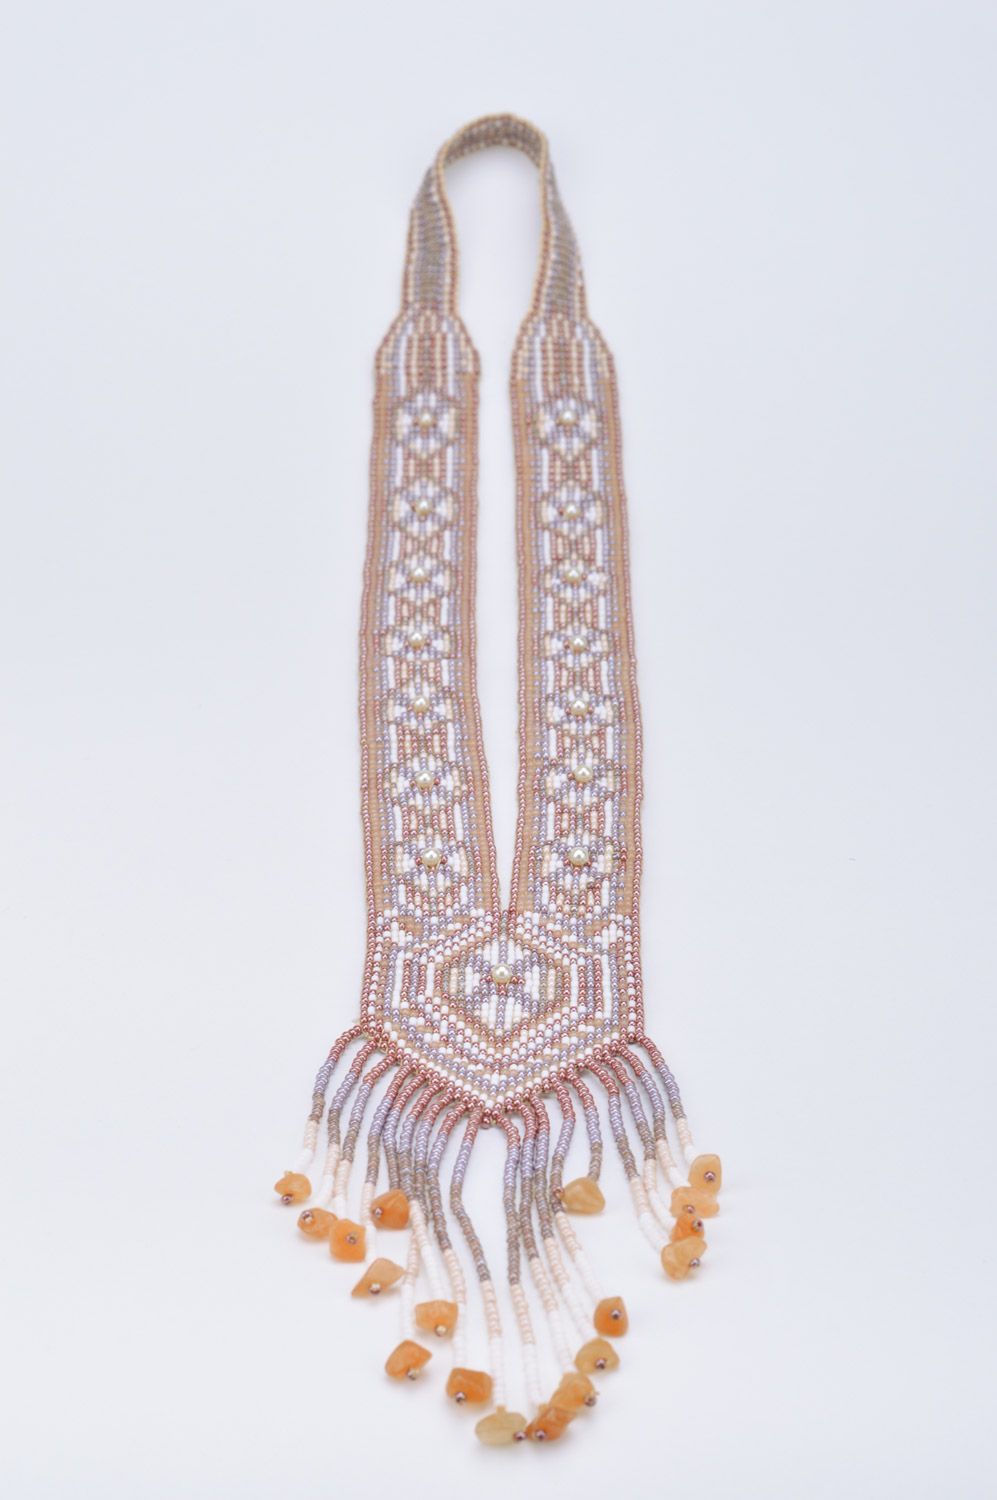 Handmade ethnic necklace woven of Czech beads with fringe in tender color palette photo 2